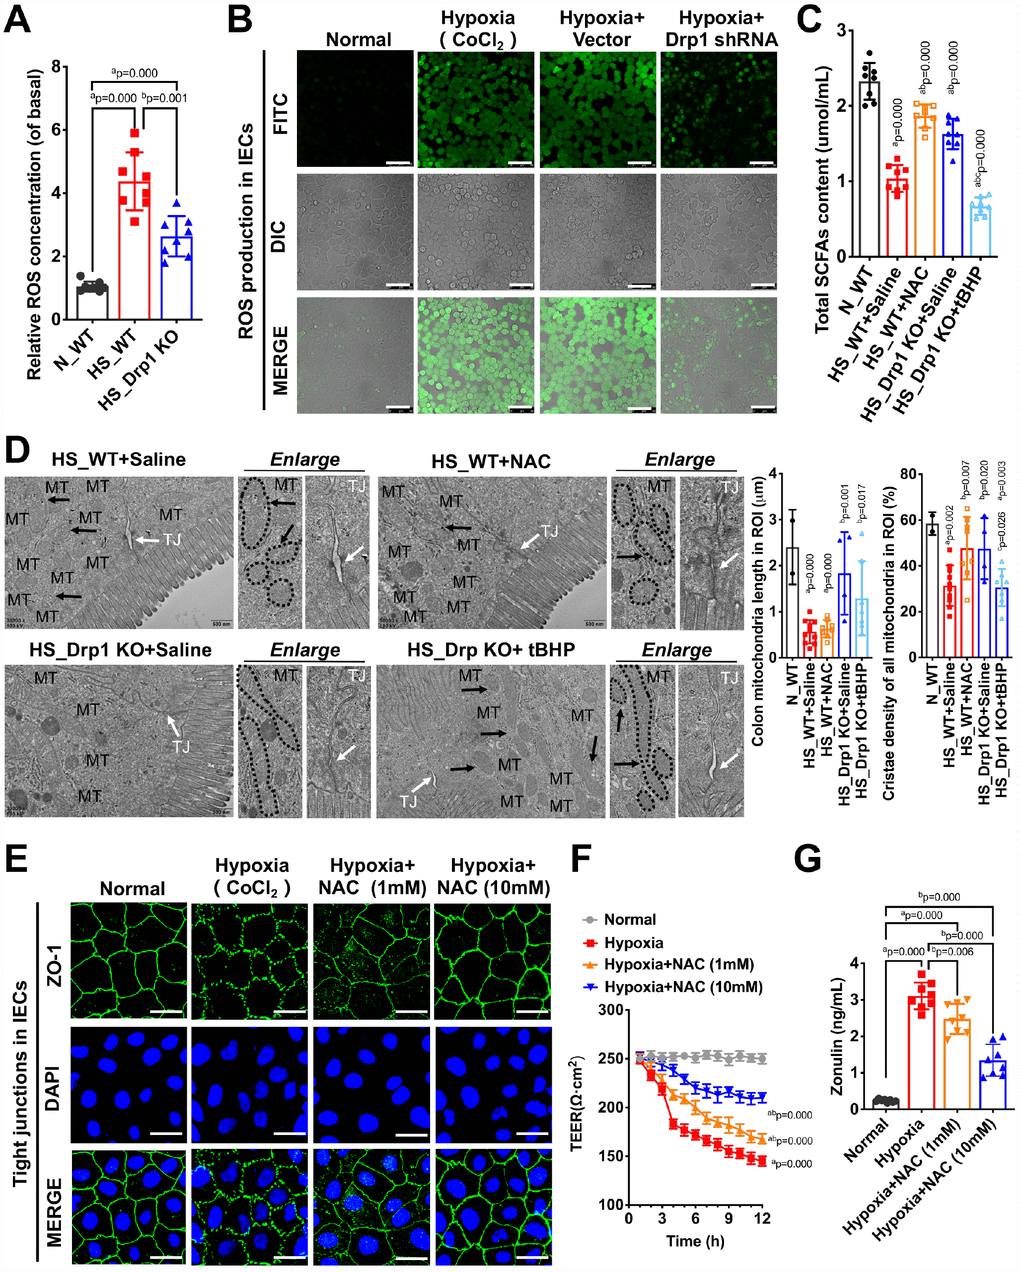 Drp1-induced ROS accumulation is involved in the regulation of gut microbiome composition and intestinal barrier function after shock or hypoxia. (A) Relative ROS concentration in colon tissues of each group (8 mice/ group). (B) The ROS fluorescence intensity of hypoxia-treated IECs after Drp1 shRNA (Bar, 50μm) (C) The content of total SCFAs after ROS intervention (8 mice/ group). (D) Mitochondrial morphology and tight junction of IECs after ROS intervention observed by electron microscopy. MT, mitochondria (black arrows refer to vacuolated cristae structure); TJ, tight junctions (white arrows). The boundaries of mitochondria are depicted and the lengths as well as cristae density of all mitochondria in ROI (region of interest) are calculated by Image J software. The mitochondrial number in ROI: 2 in N